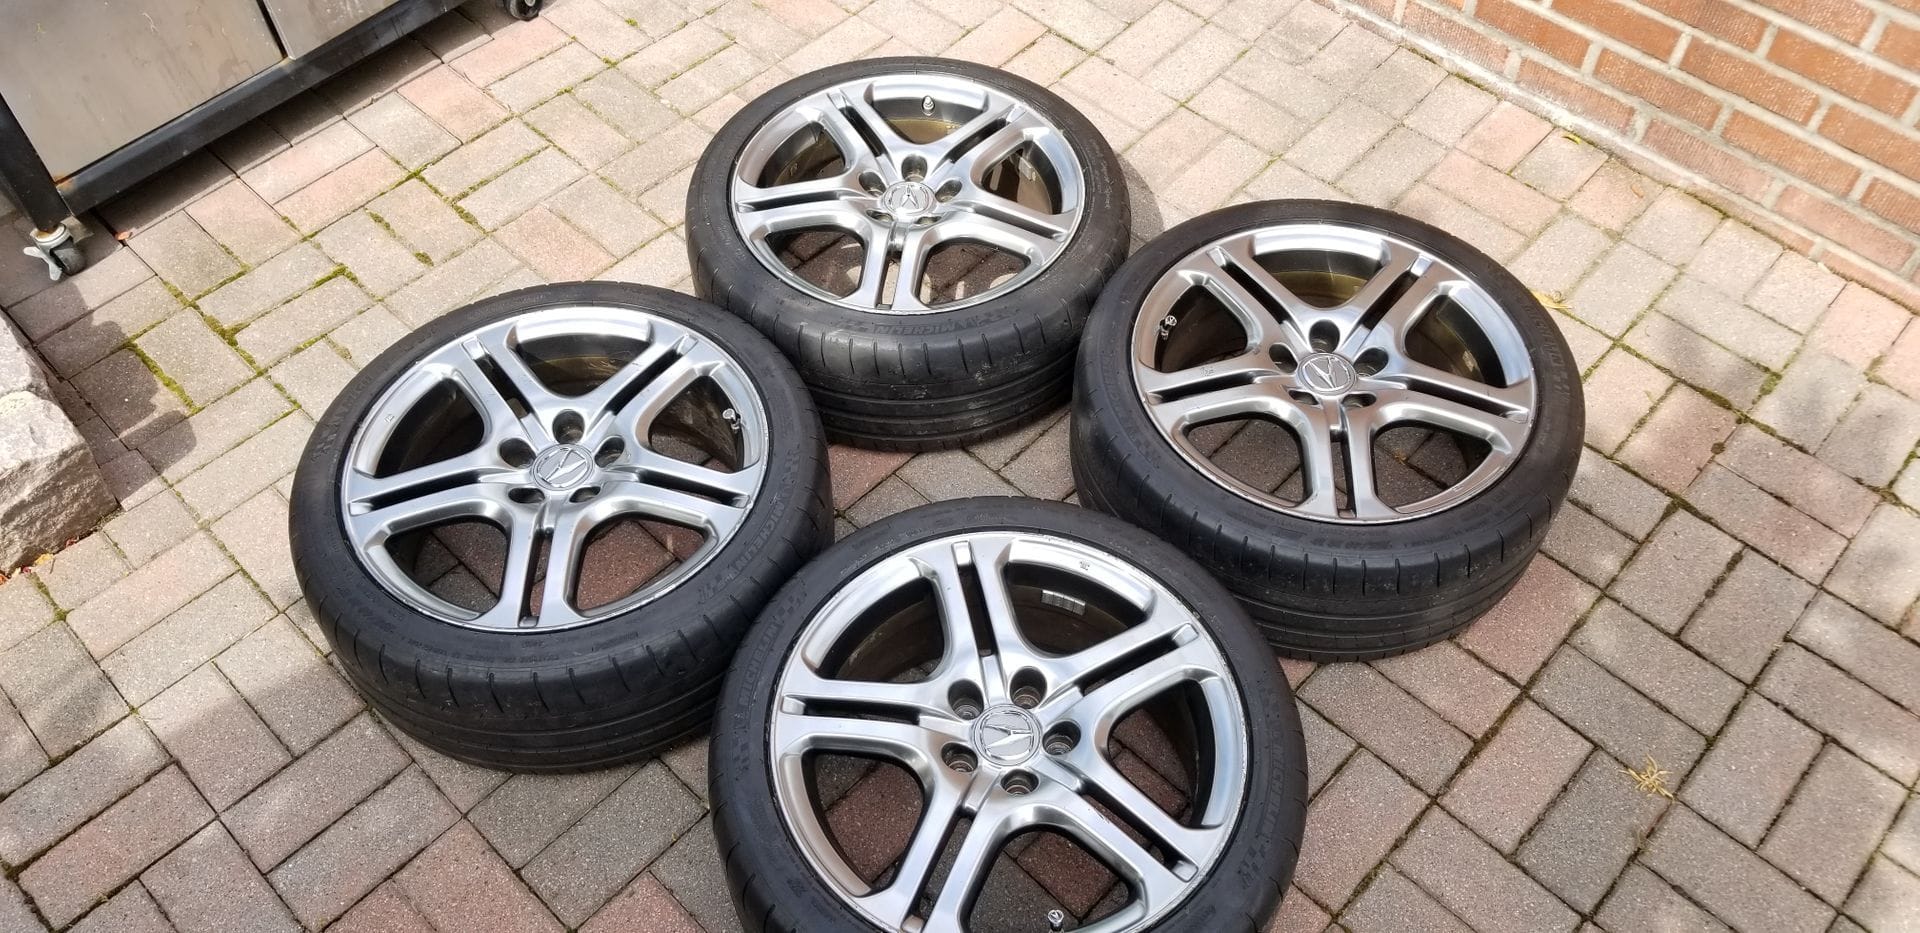 Wheels and Tires/Axles - FS: 04-08 TL A-Spec wheels (Satin finish) with tires, for sale in New Jersey. - Used - 2004 to 2008 Acura TL - Cliffside Park, NJ 07010, United States